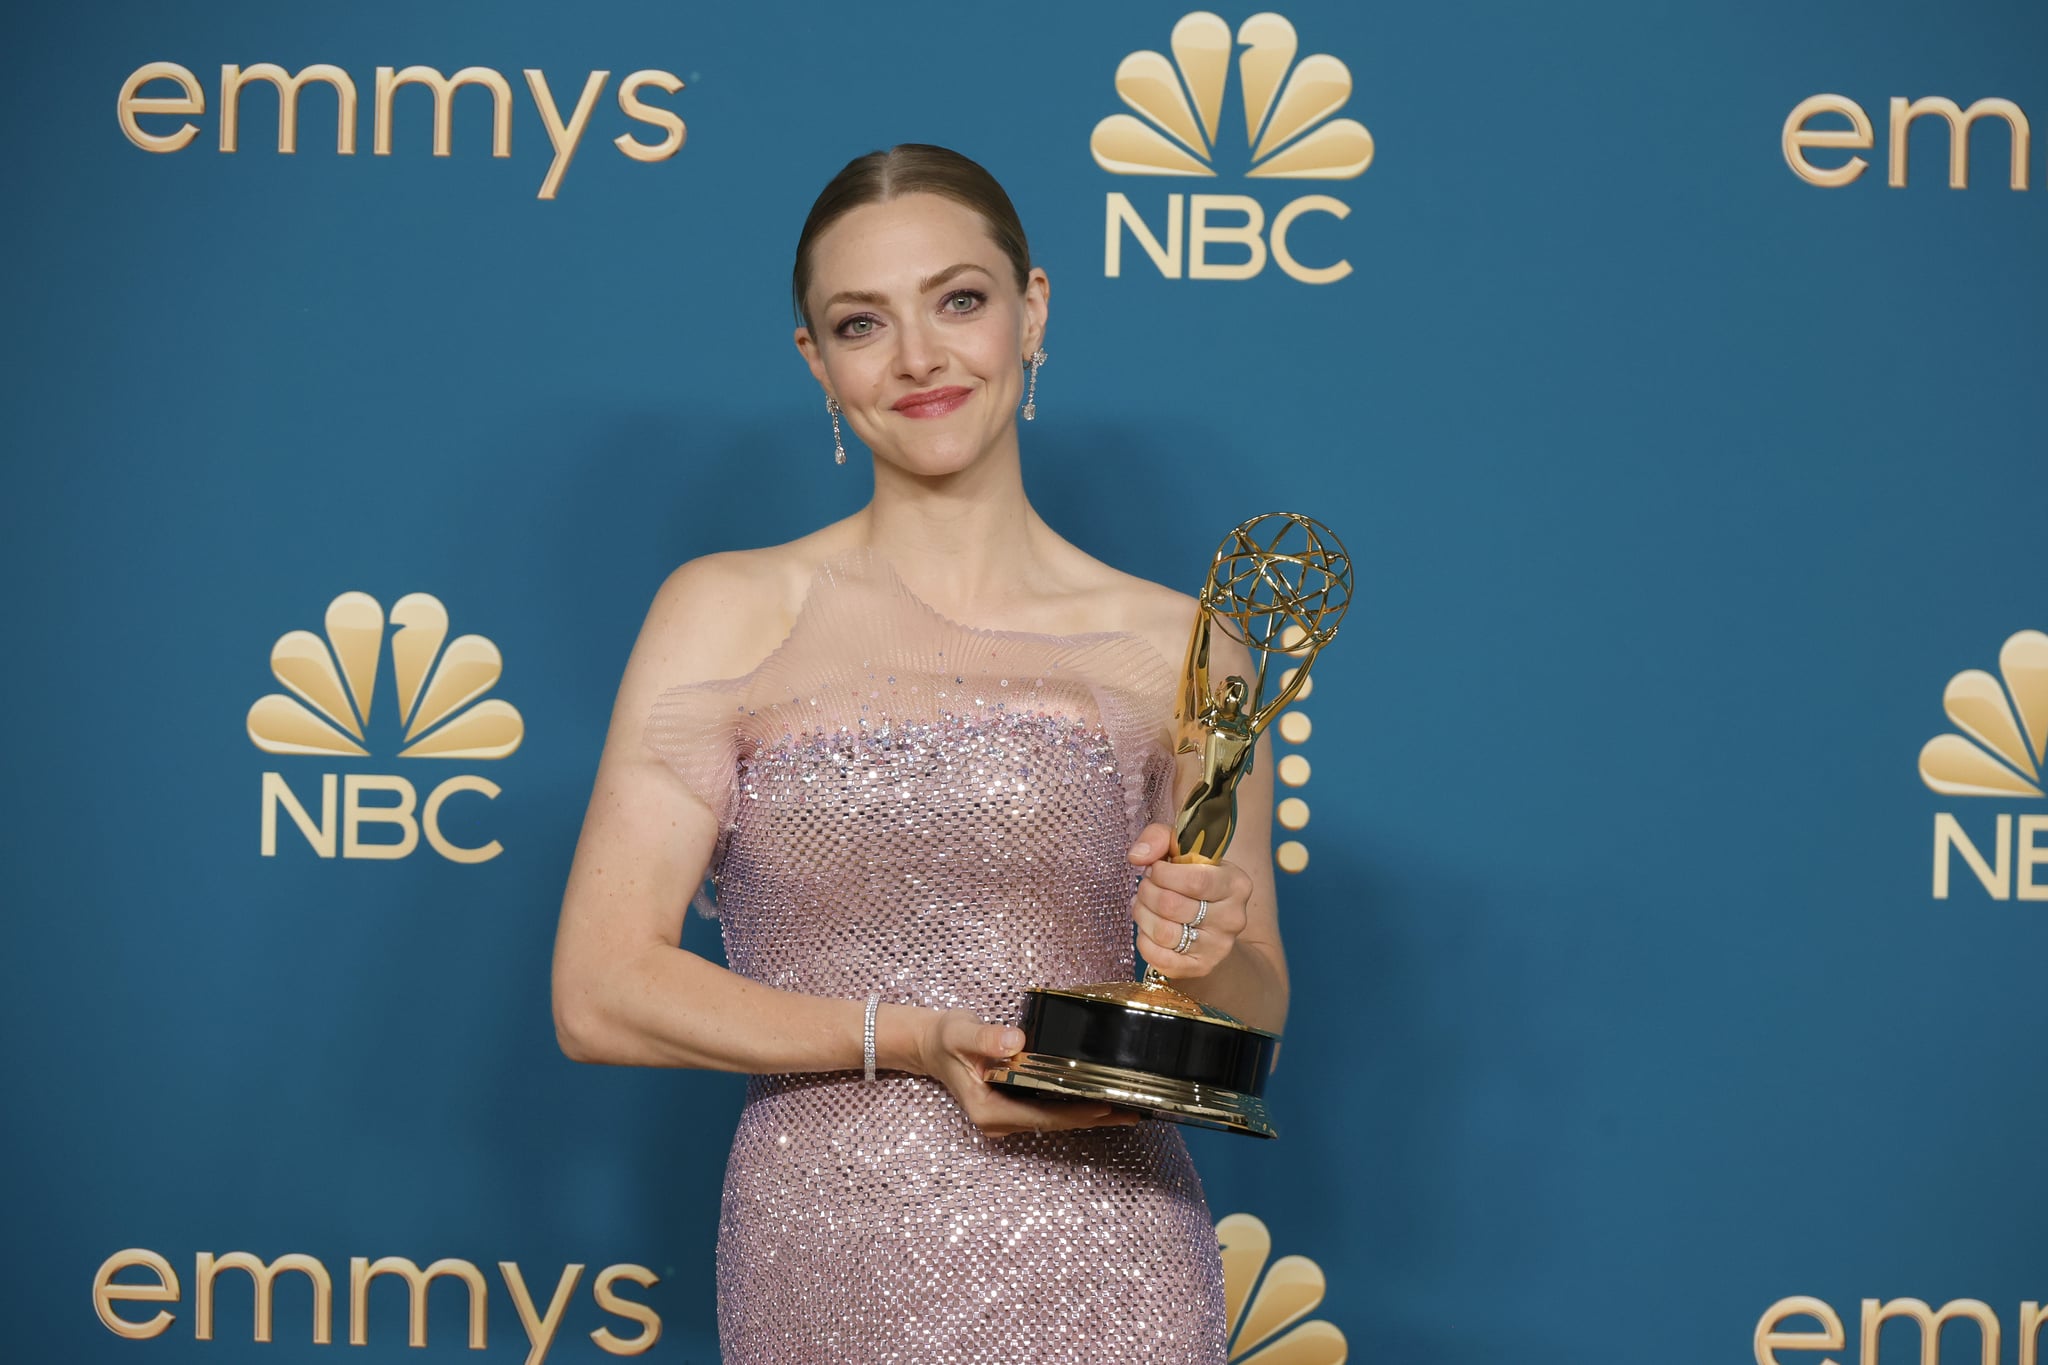 LOS ANGELES, CALIFORNIA - SEPTEMBER 12: Amanda Seyfried, winner of the Outstanding Lead Actress in a Limited or Anthology Series or Movie award for 'The Dropout,' poses in the press room during the 74th Primetime Emmys at Microsoft Theater on September 12, 2022 in Los Angeles, California. (Photo by Frazer Harrison/Getty Images)